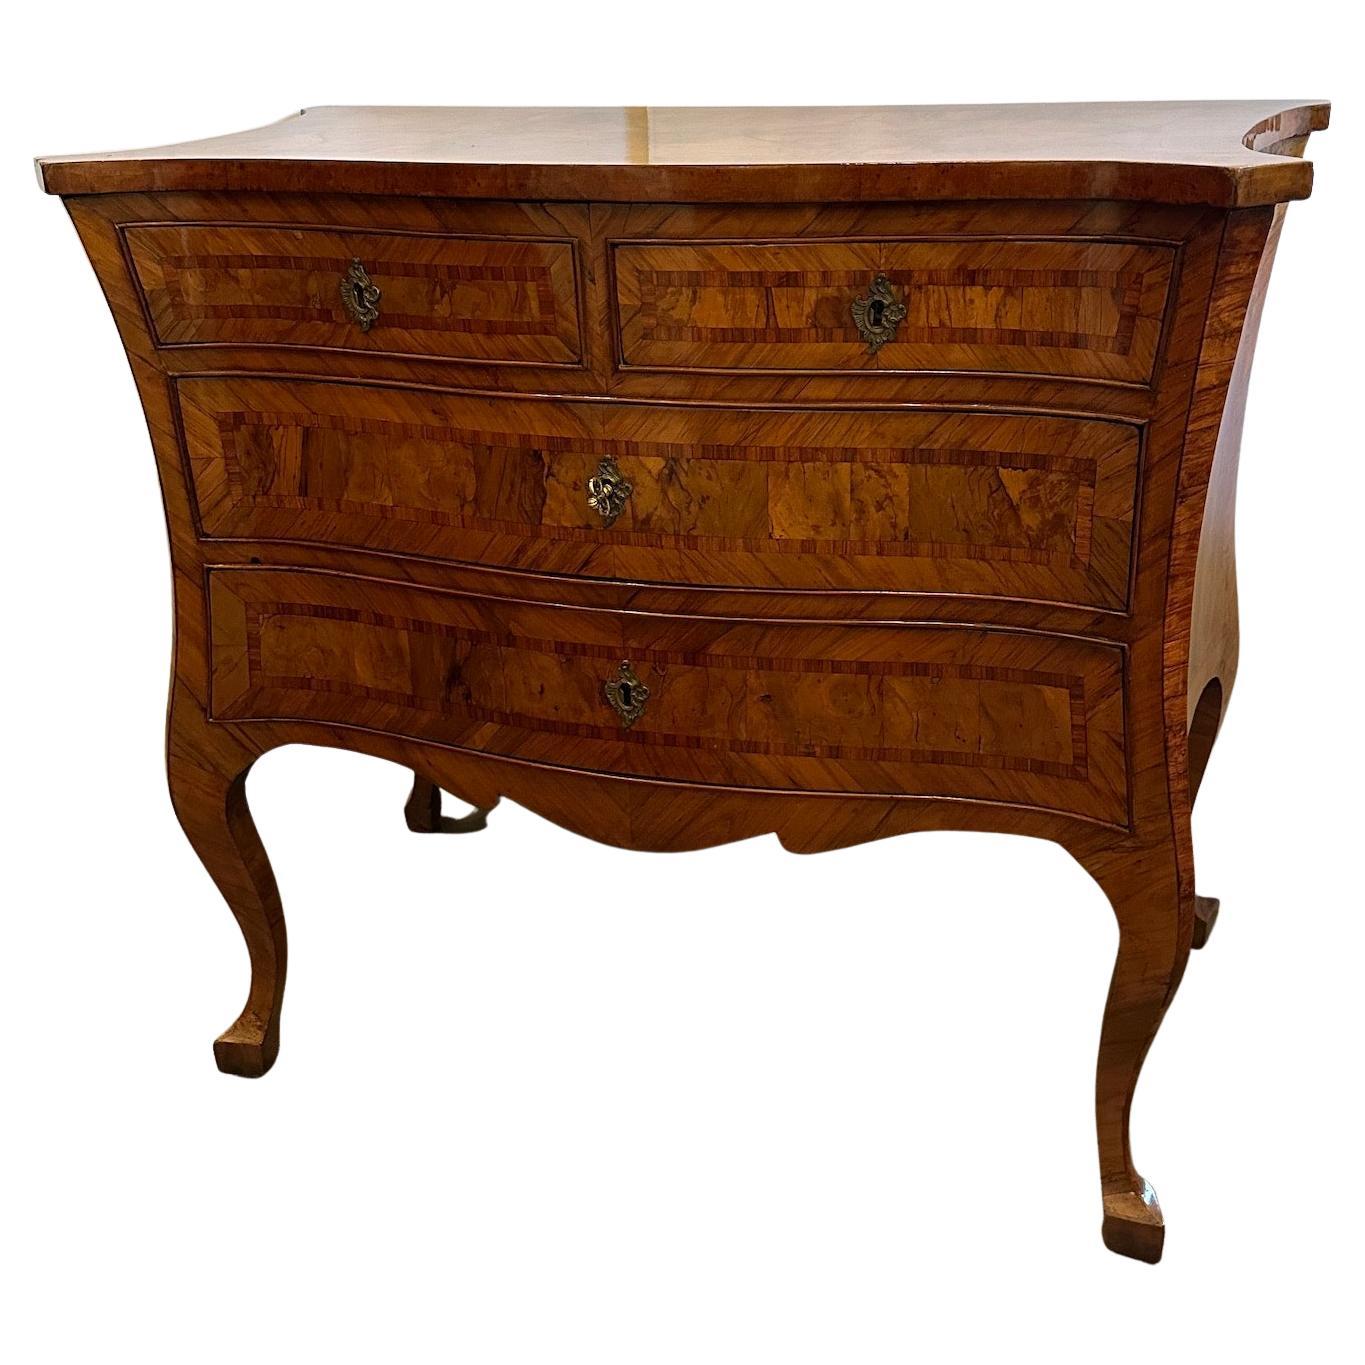 An elegant burled walnut veneered, inlaid, serpentine shaped commode.  Bronze hardware with traces of gilding.  4 drawers.  